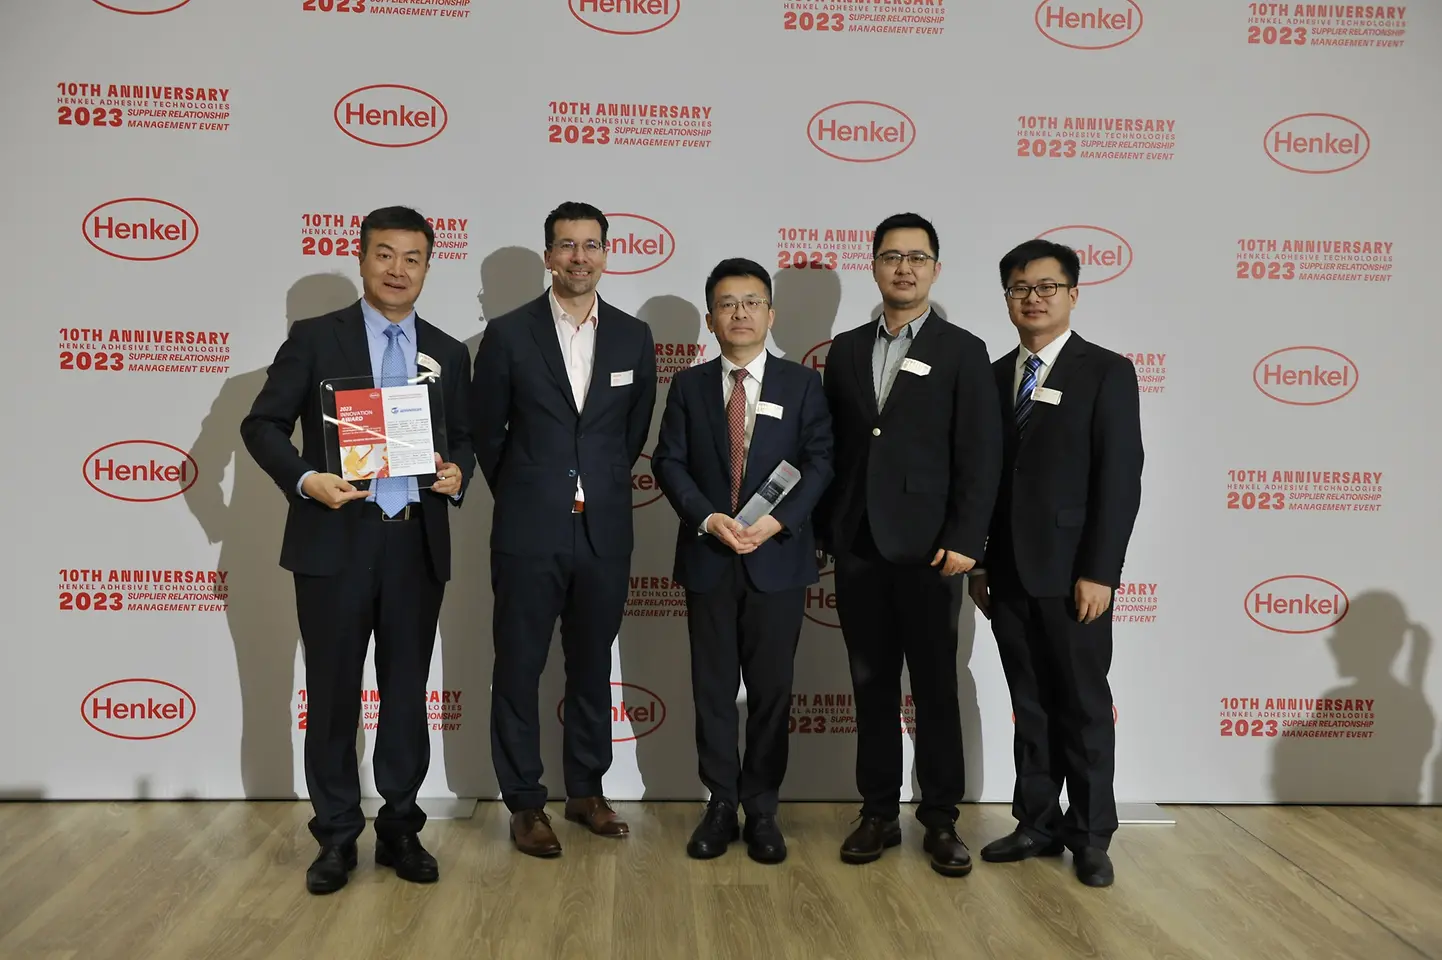 
Innovation Award 2023 for Wanhua (from left to right): Wenping Zhang – General Manager of International Department at Wanhua, Mark Dorn – Executive Vice President Henkel Adhesive Technologies, Jiakuan Sun – Deputy Dean of Central Research Institute at Wanhua, Gary Gu – Deputy General Manager of Surface Materials Business Group at Wanhua, Ben Zhang – R&D Manager for Adhesive Materials at Wanhua